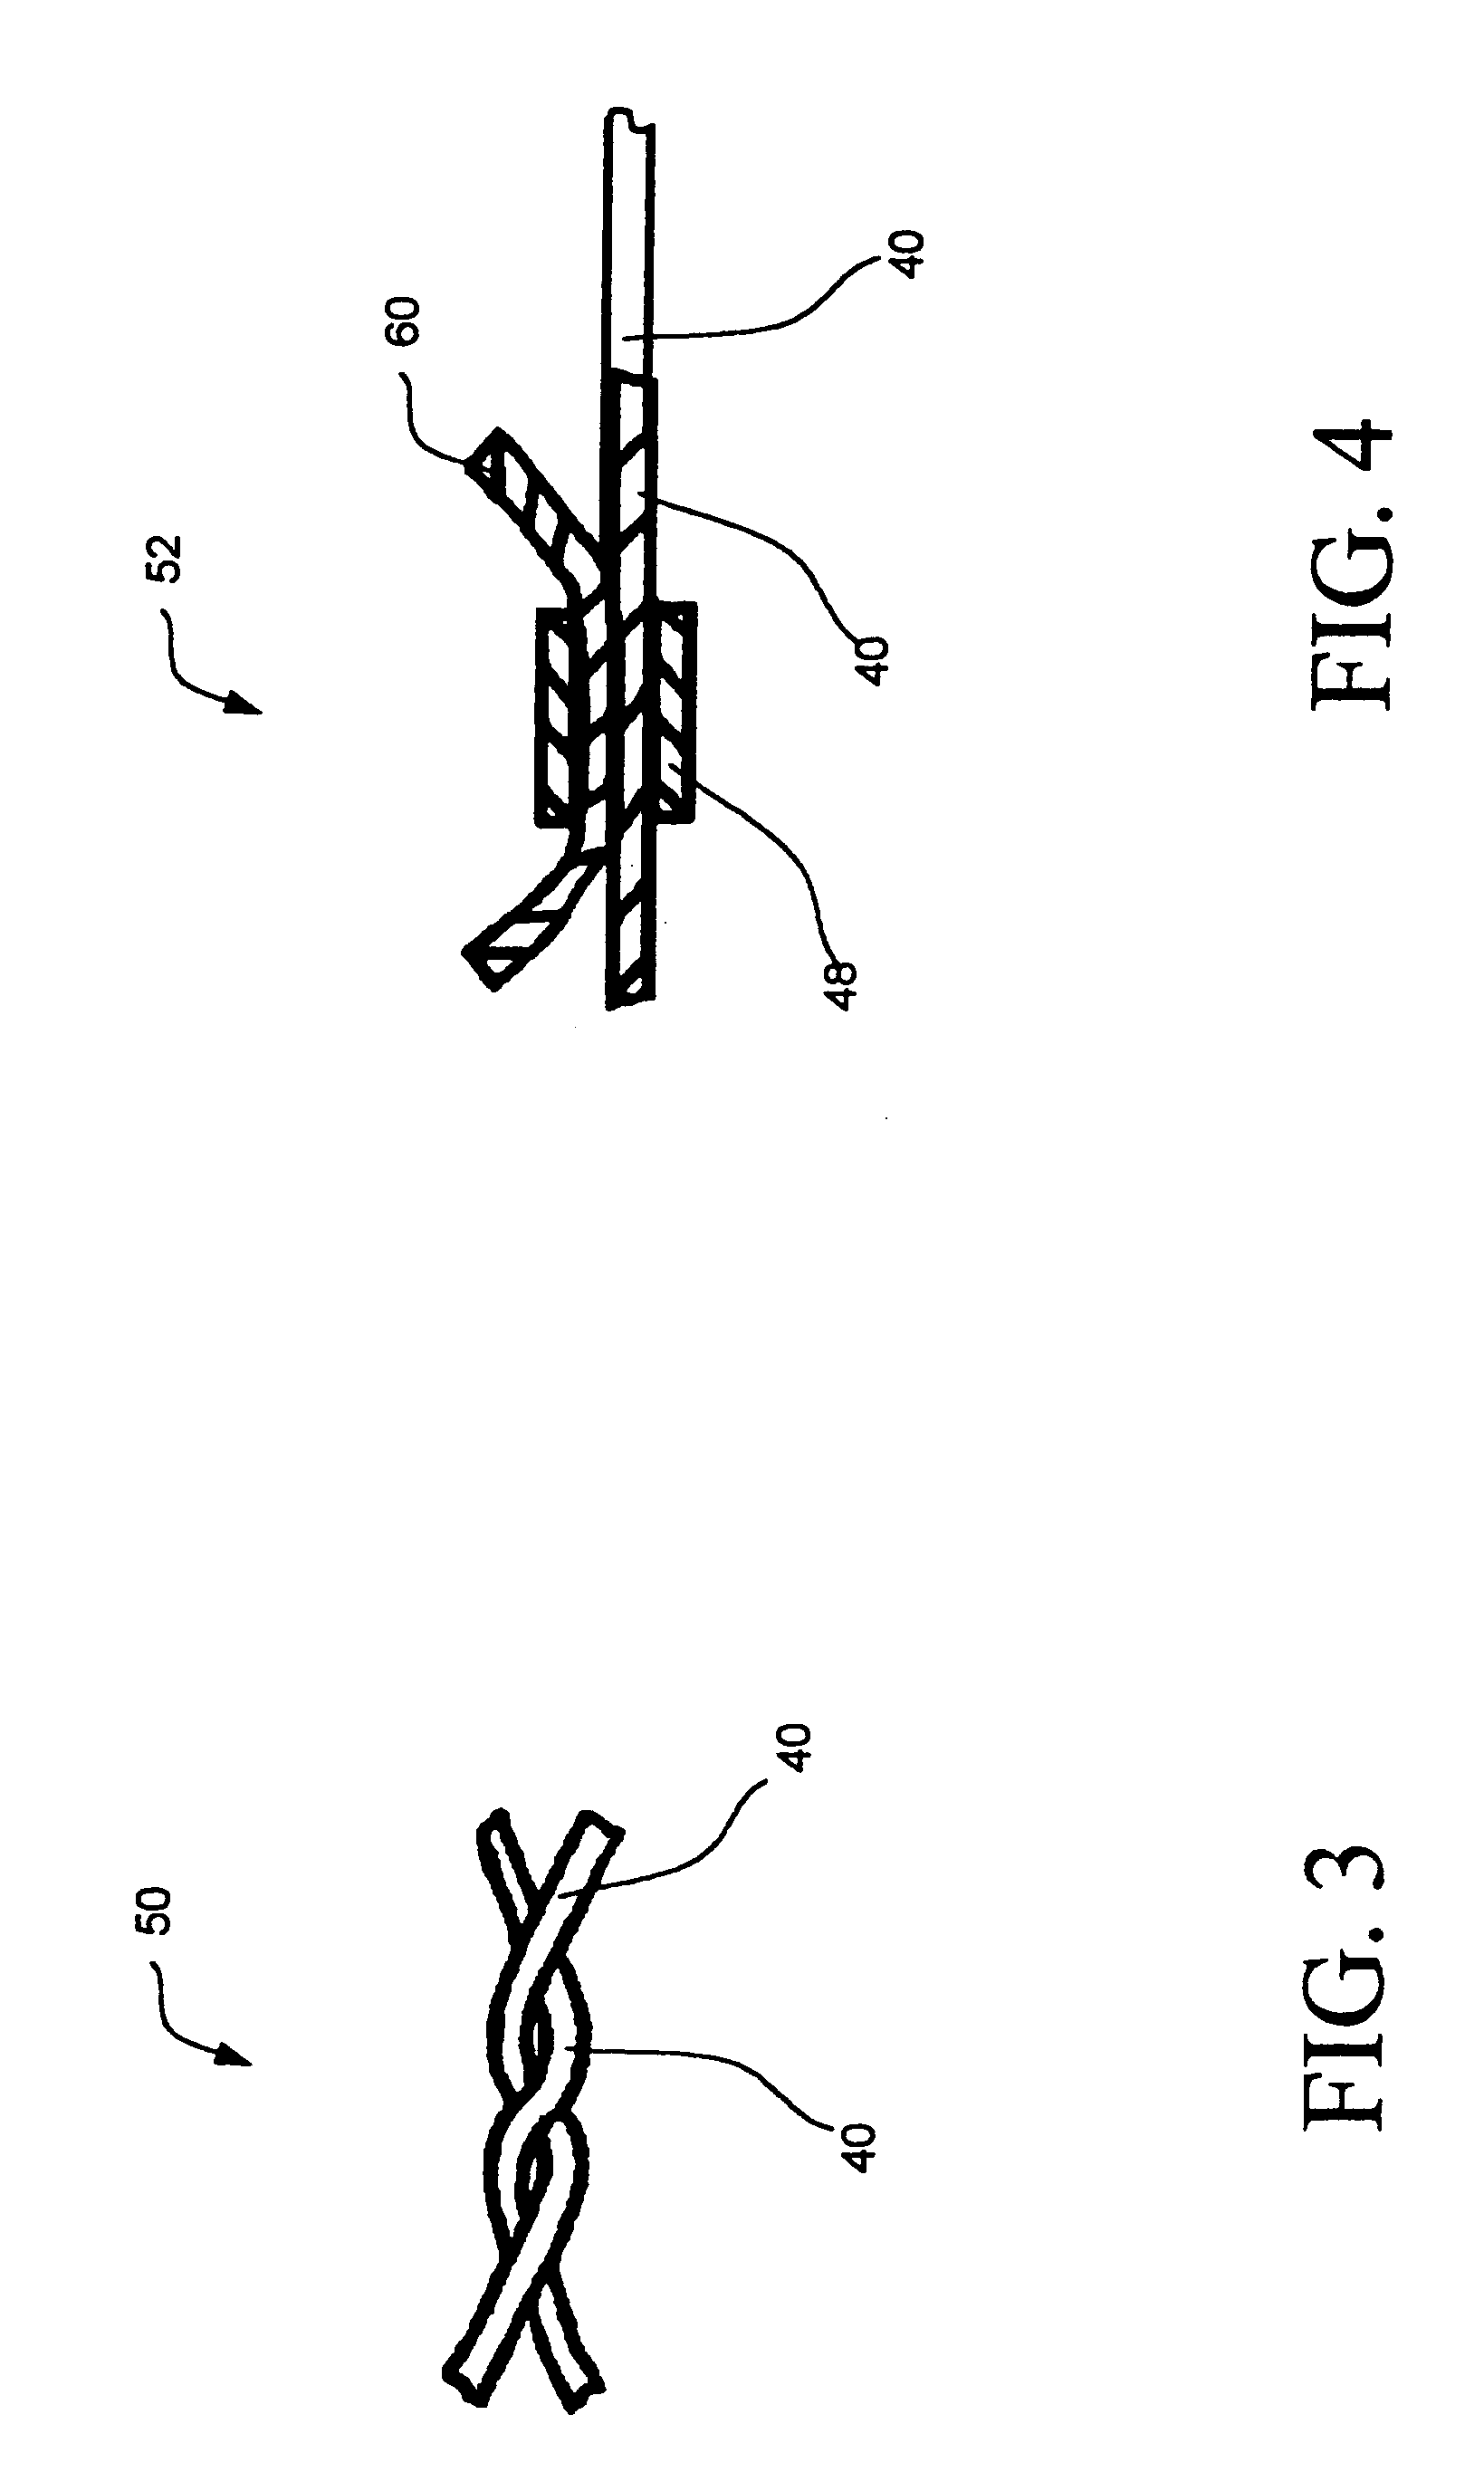 Intravascular filtering devices and methods